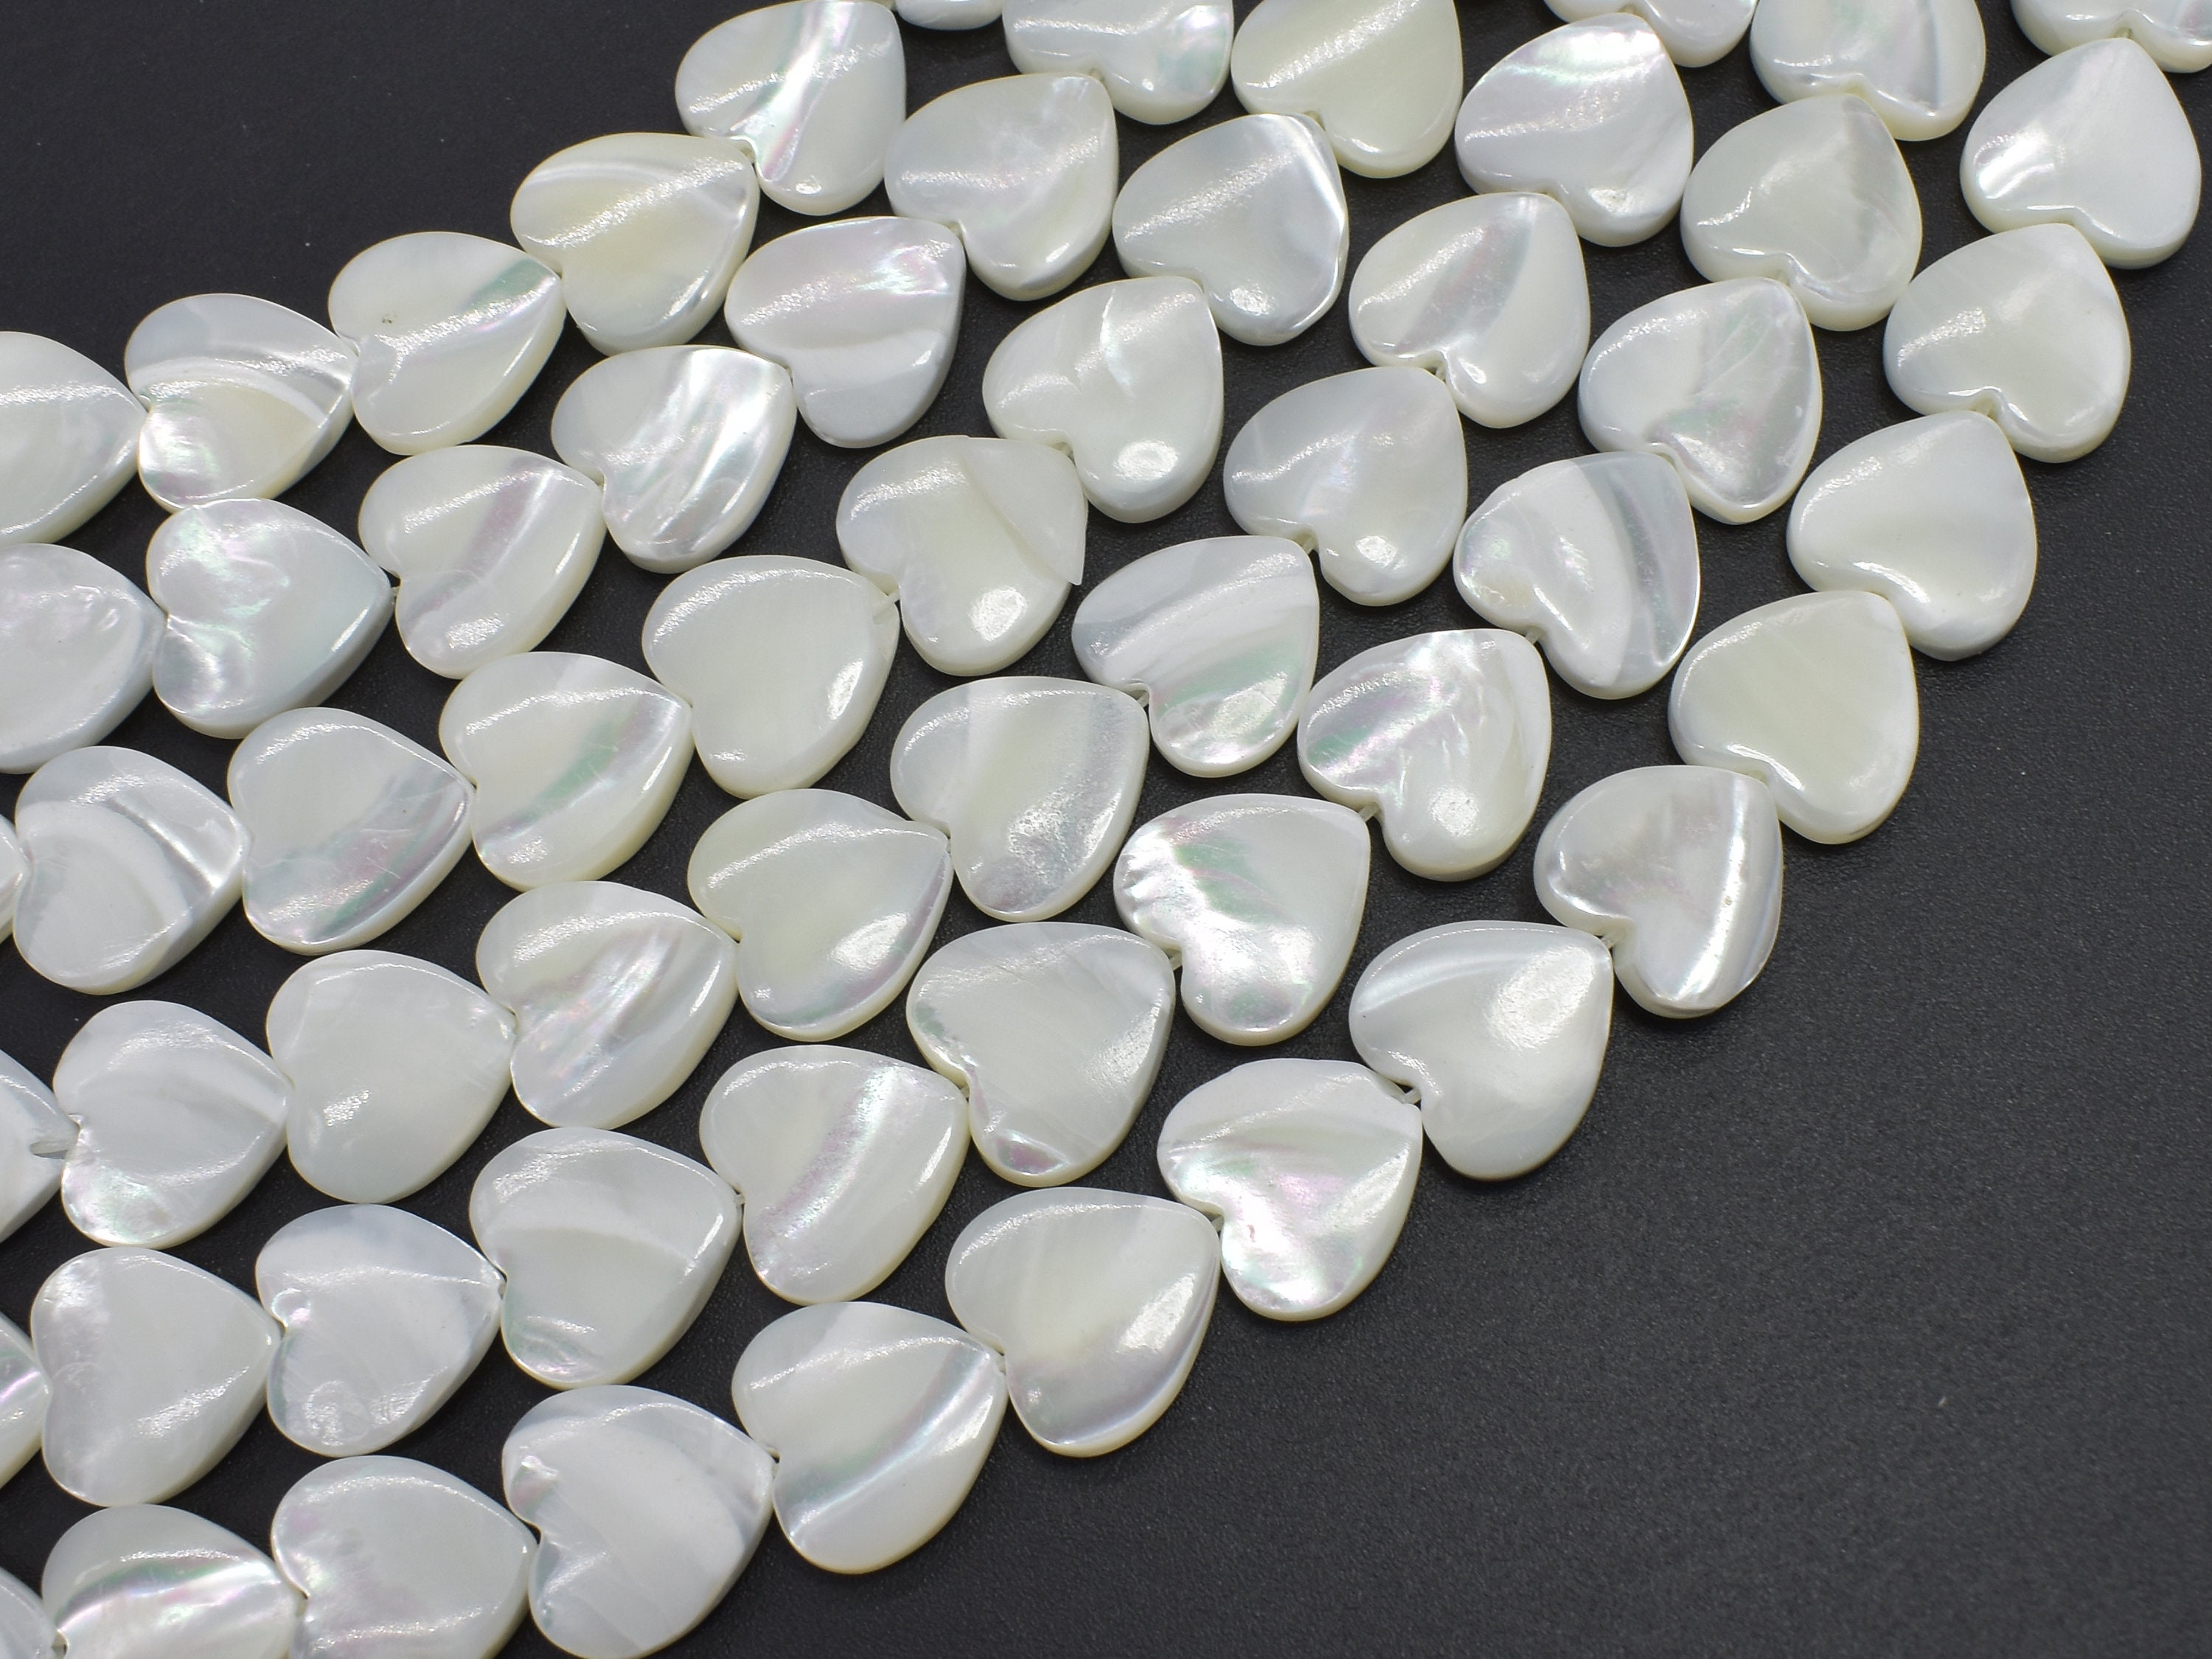 2MM White 12/0 Glass Seed Beads A010-44 